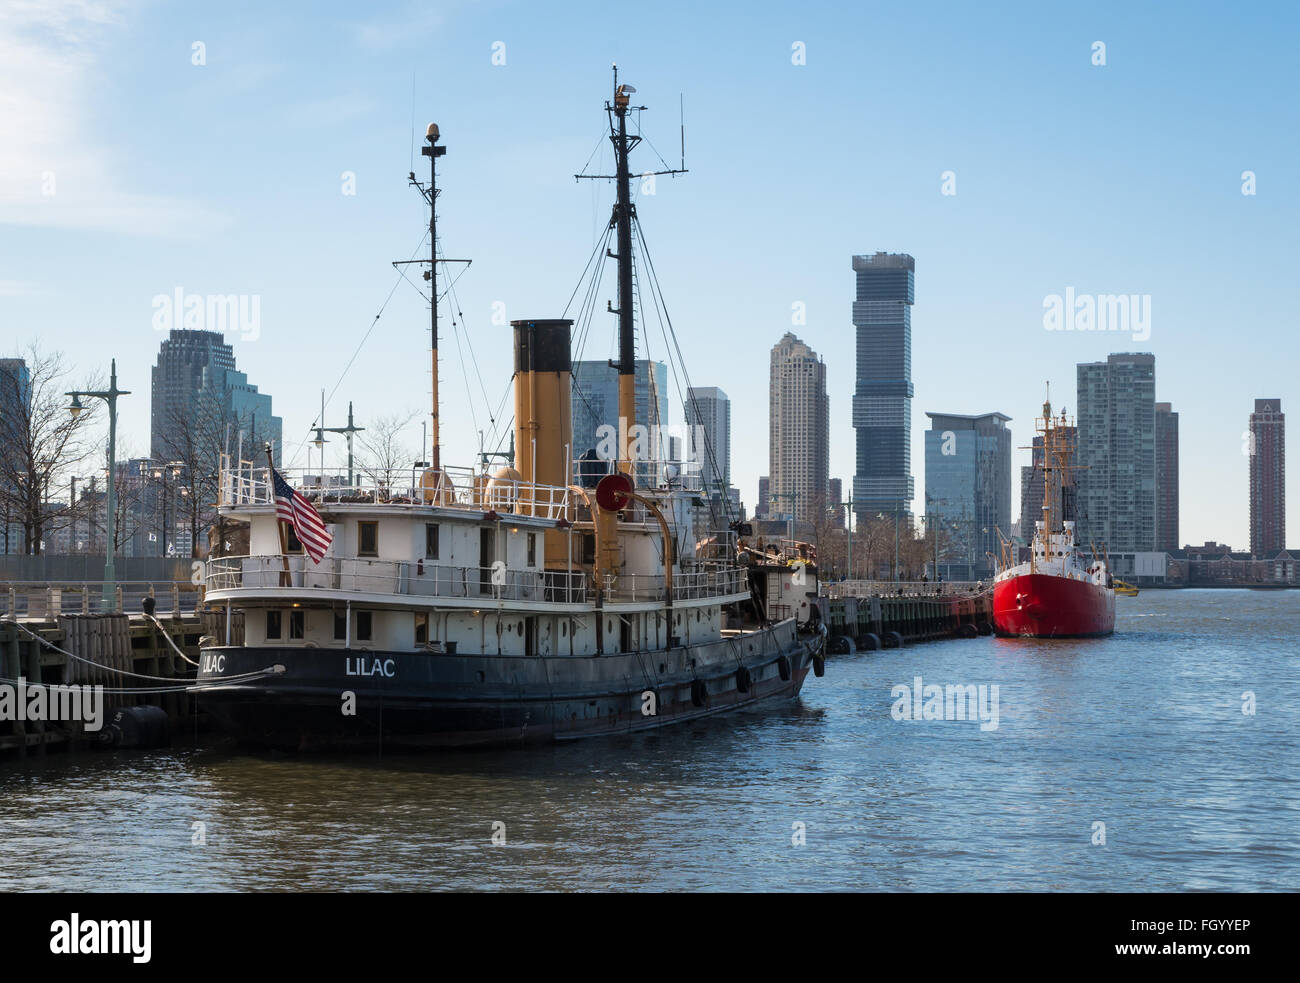 Lilac steam boat docked at Pier 25 in Tribeca on the Hudson River, New York, is an old lighthouse tender ship. Stock Photo